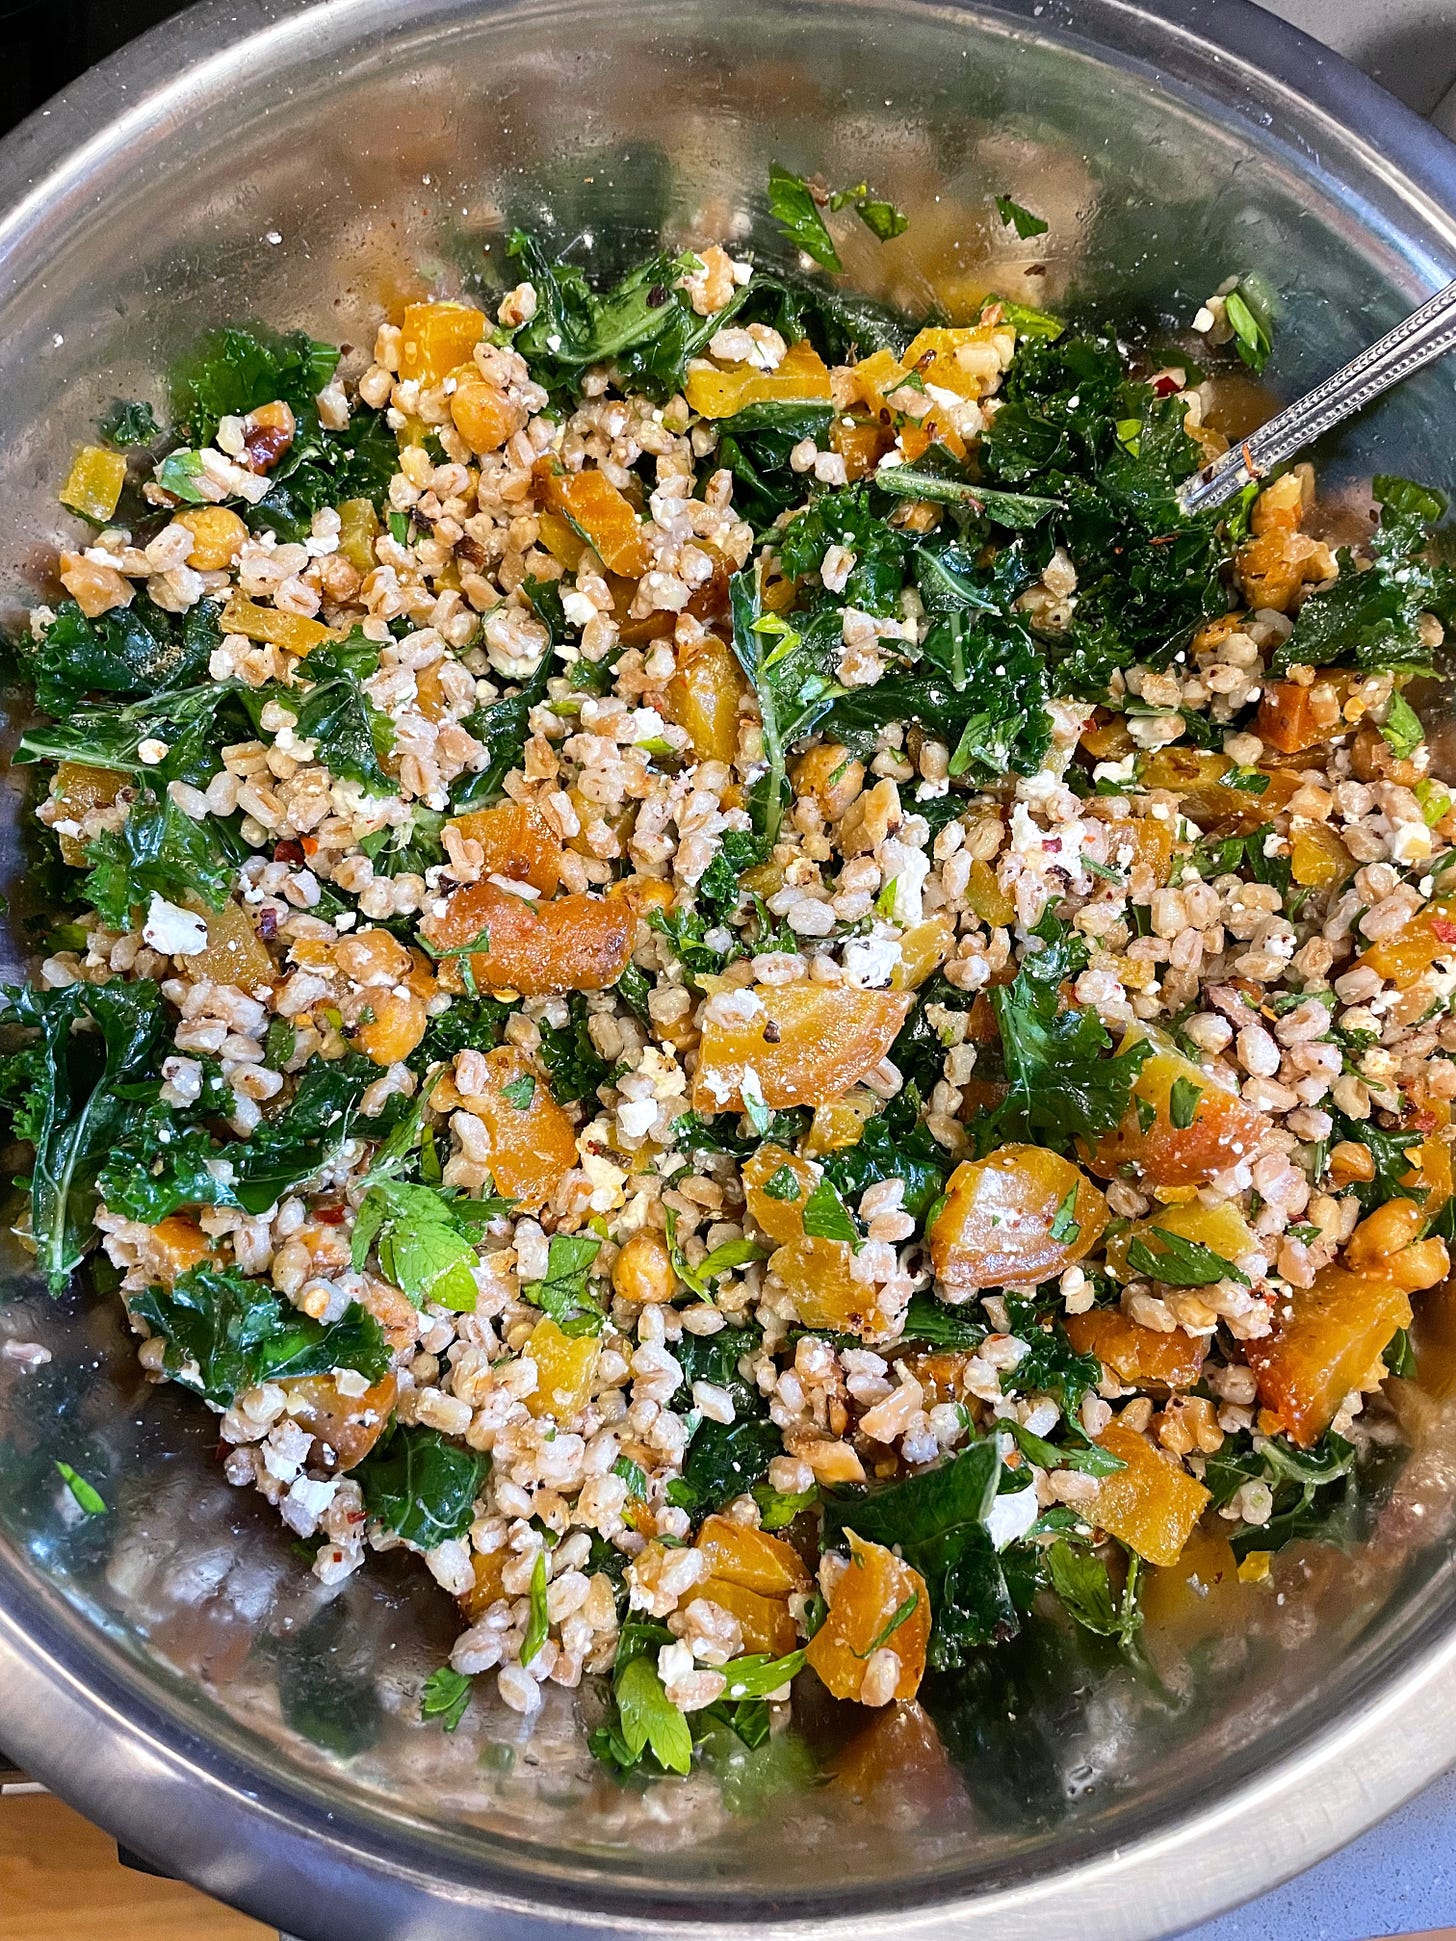 farro salad with golden beets, kale, chickpeas, herbs